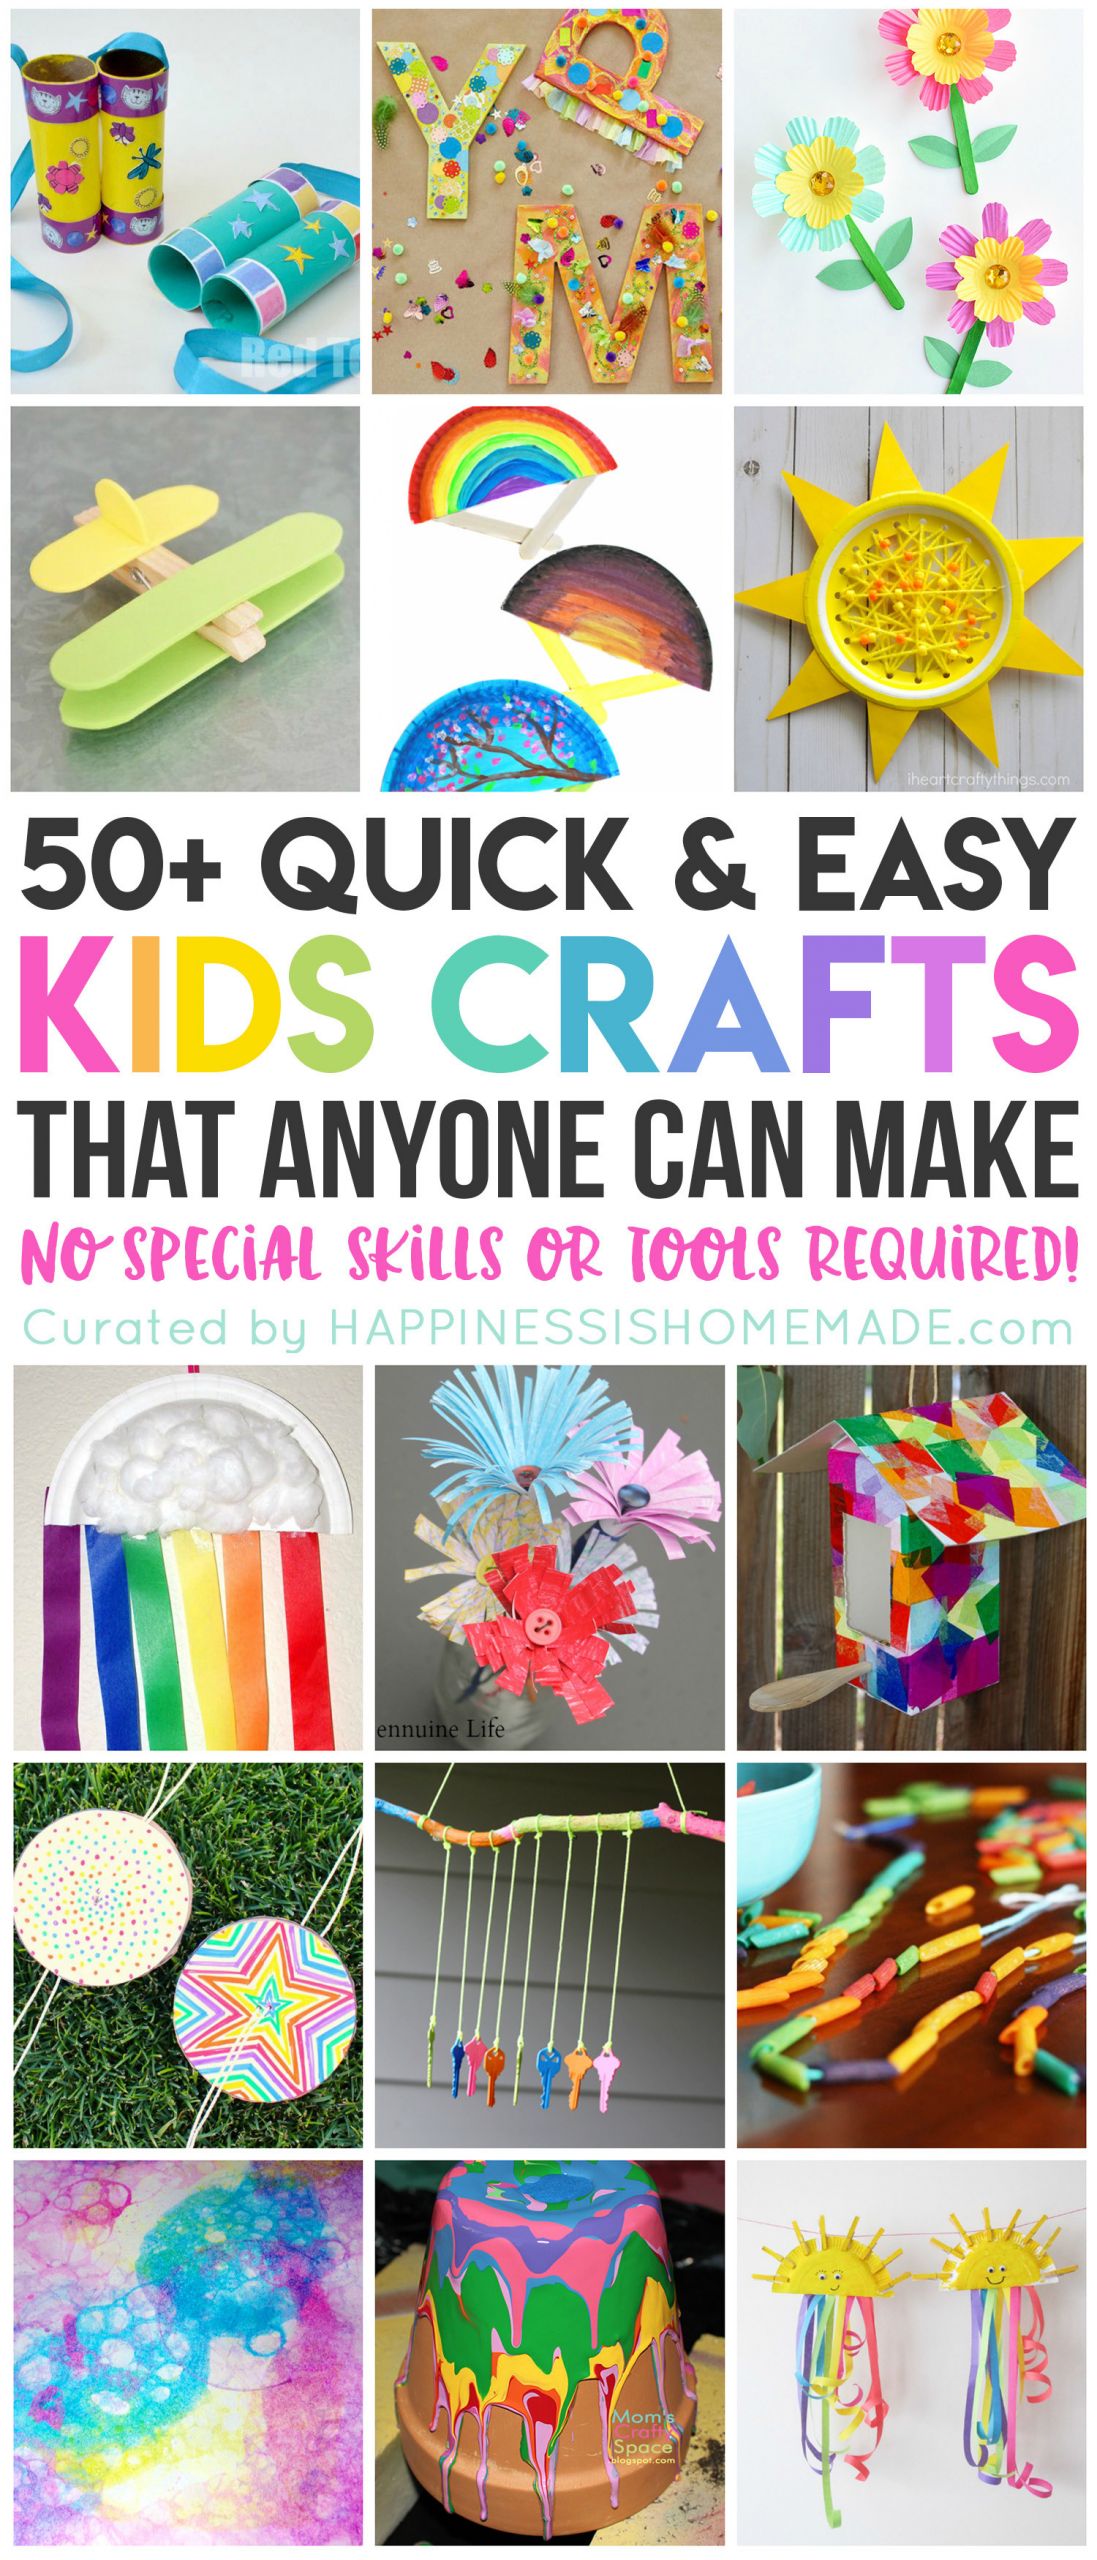 Fun Things To Make With Kids
 50 Quick & Easy Kids Crafts that ANYONE Can Make